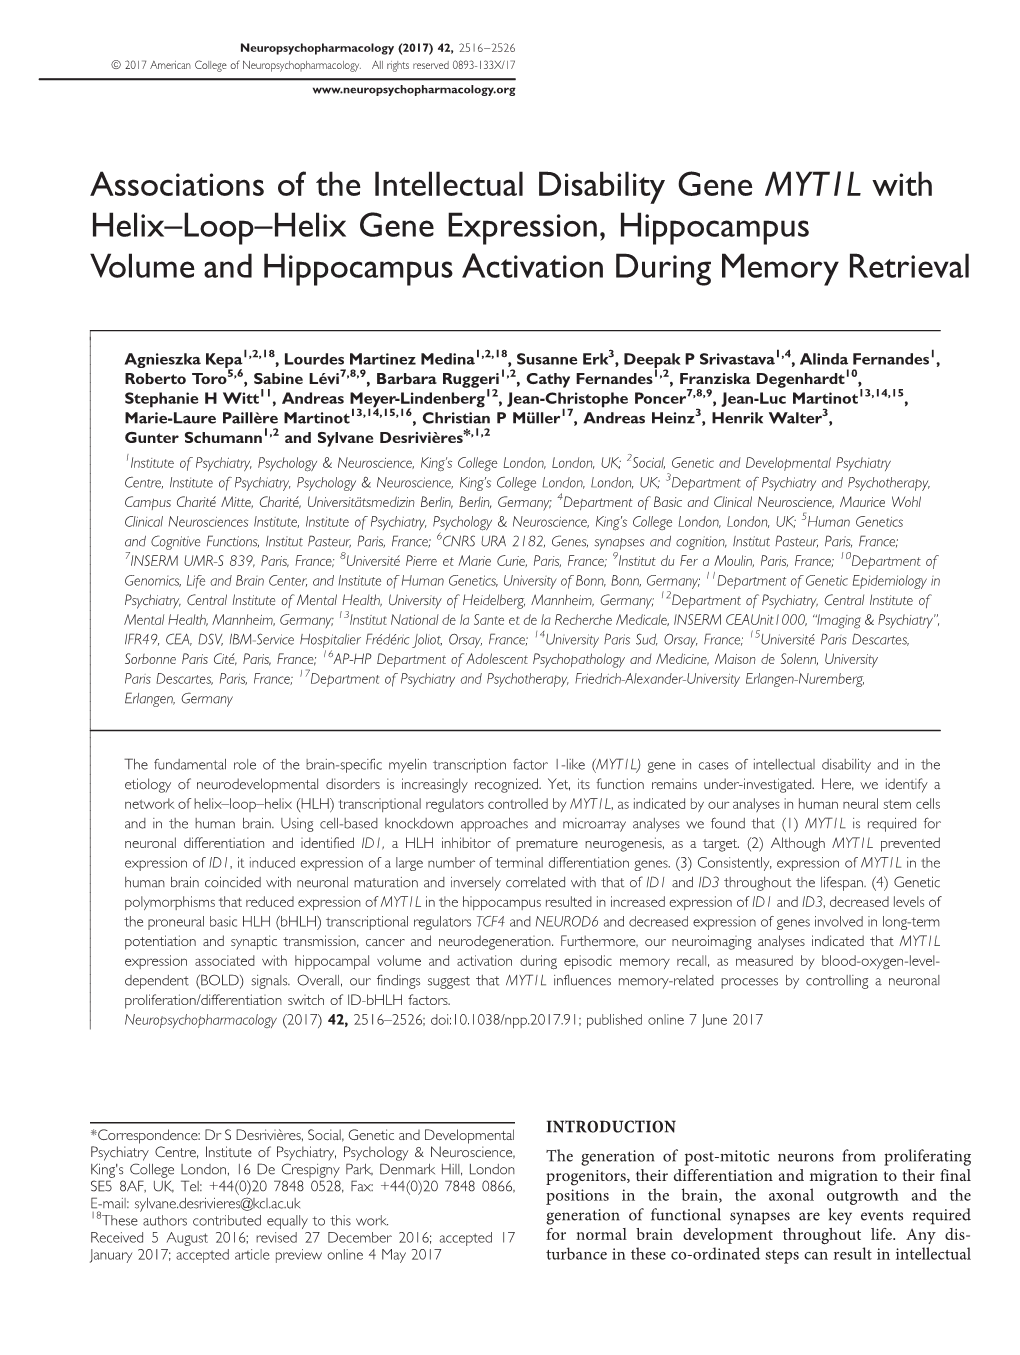 Associations of the Intellectual Disability Gene MYT1L with Helix–Loop–Helix Gene Expression, Hippocampus Volume and Hippocampus Activation During Memory Retrieval